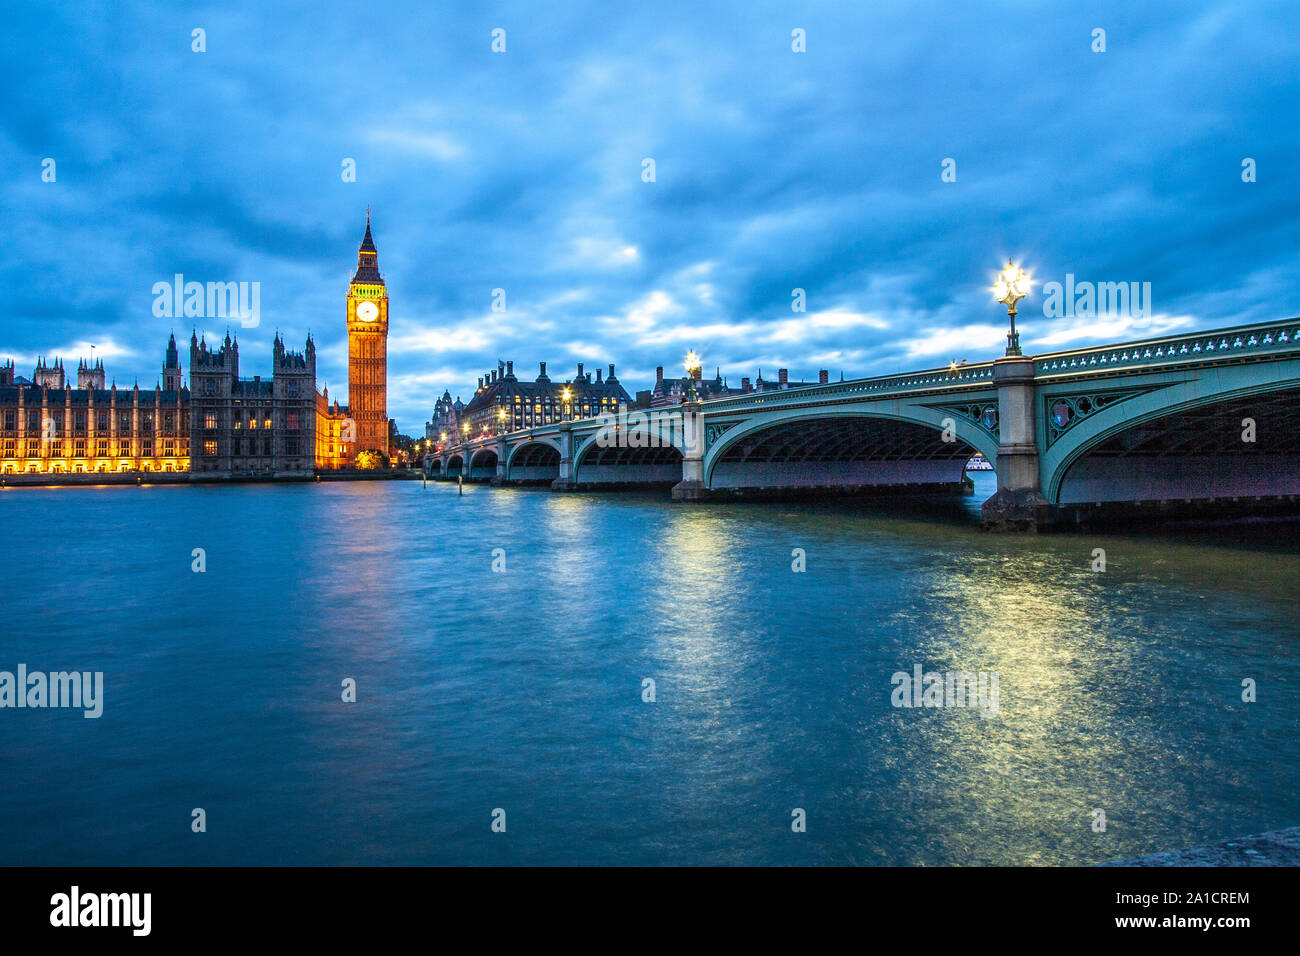 Cityscape of London Bridge and Tower Bridge in London, Uk, during the night Stock Photo